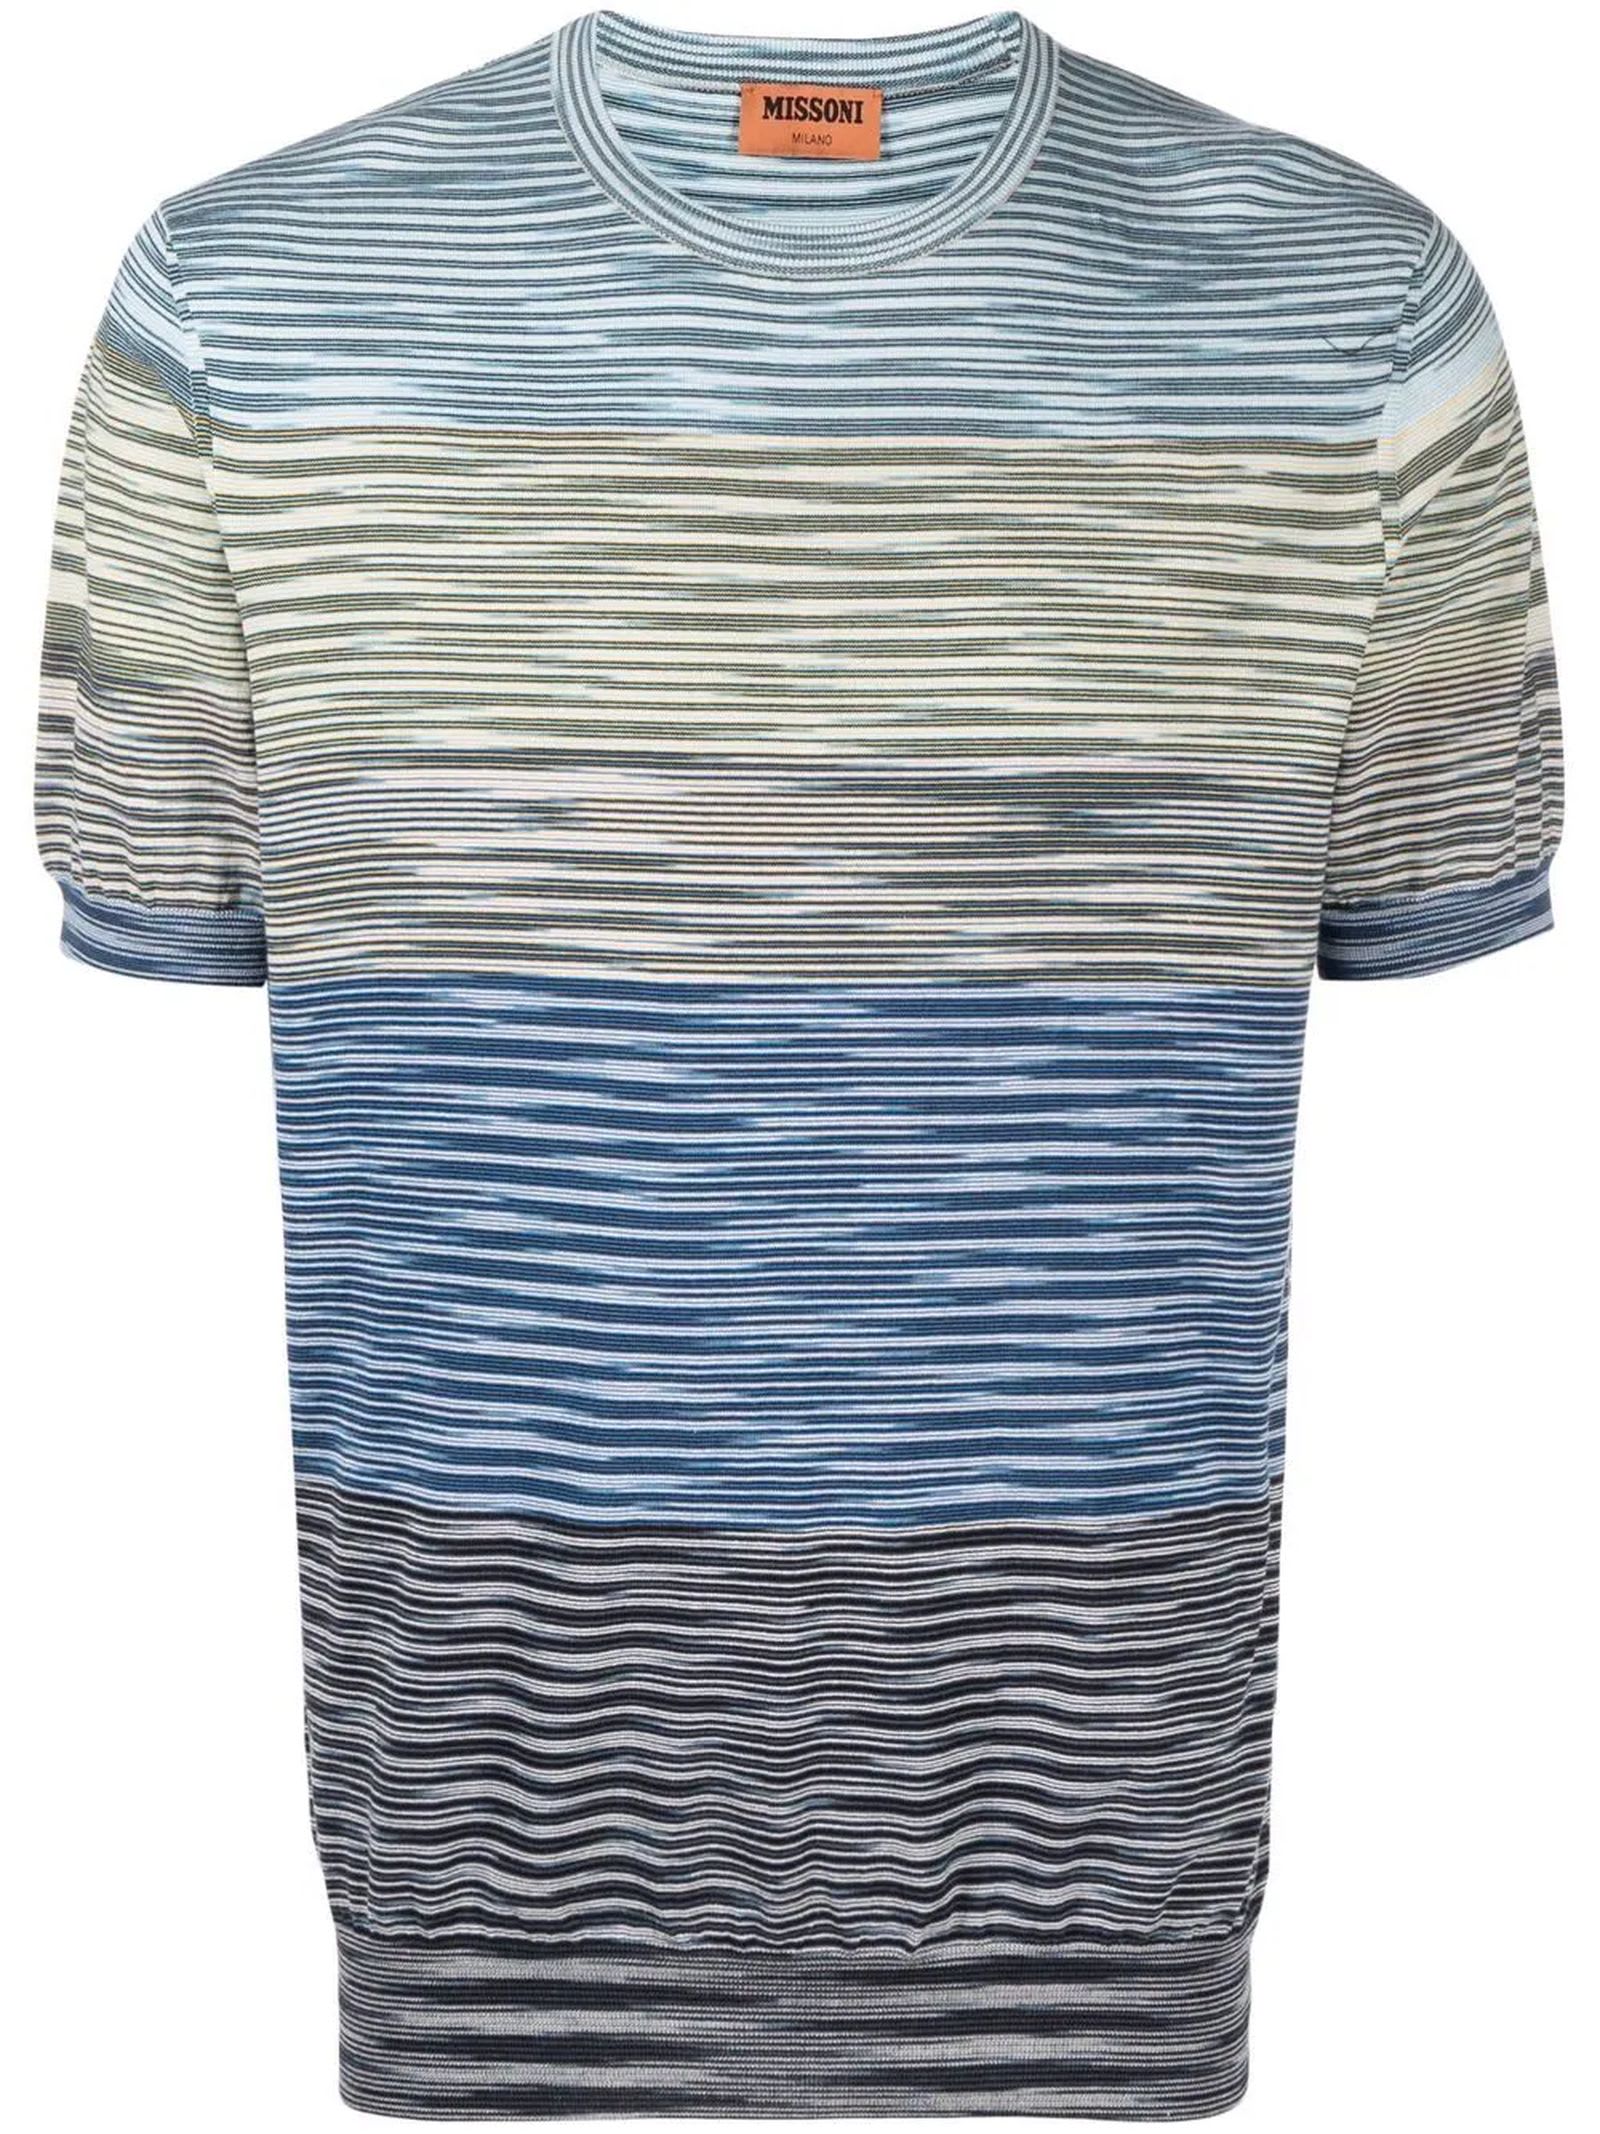 Missoni Blue And Grey Cotton T-shirt